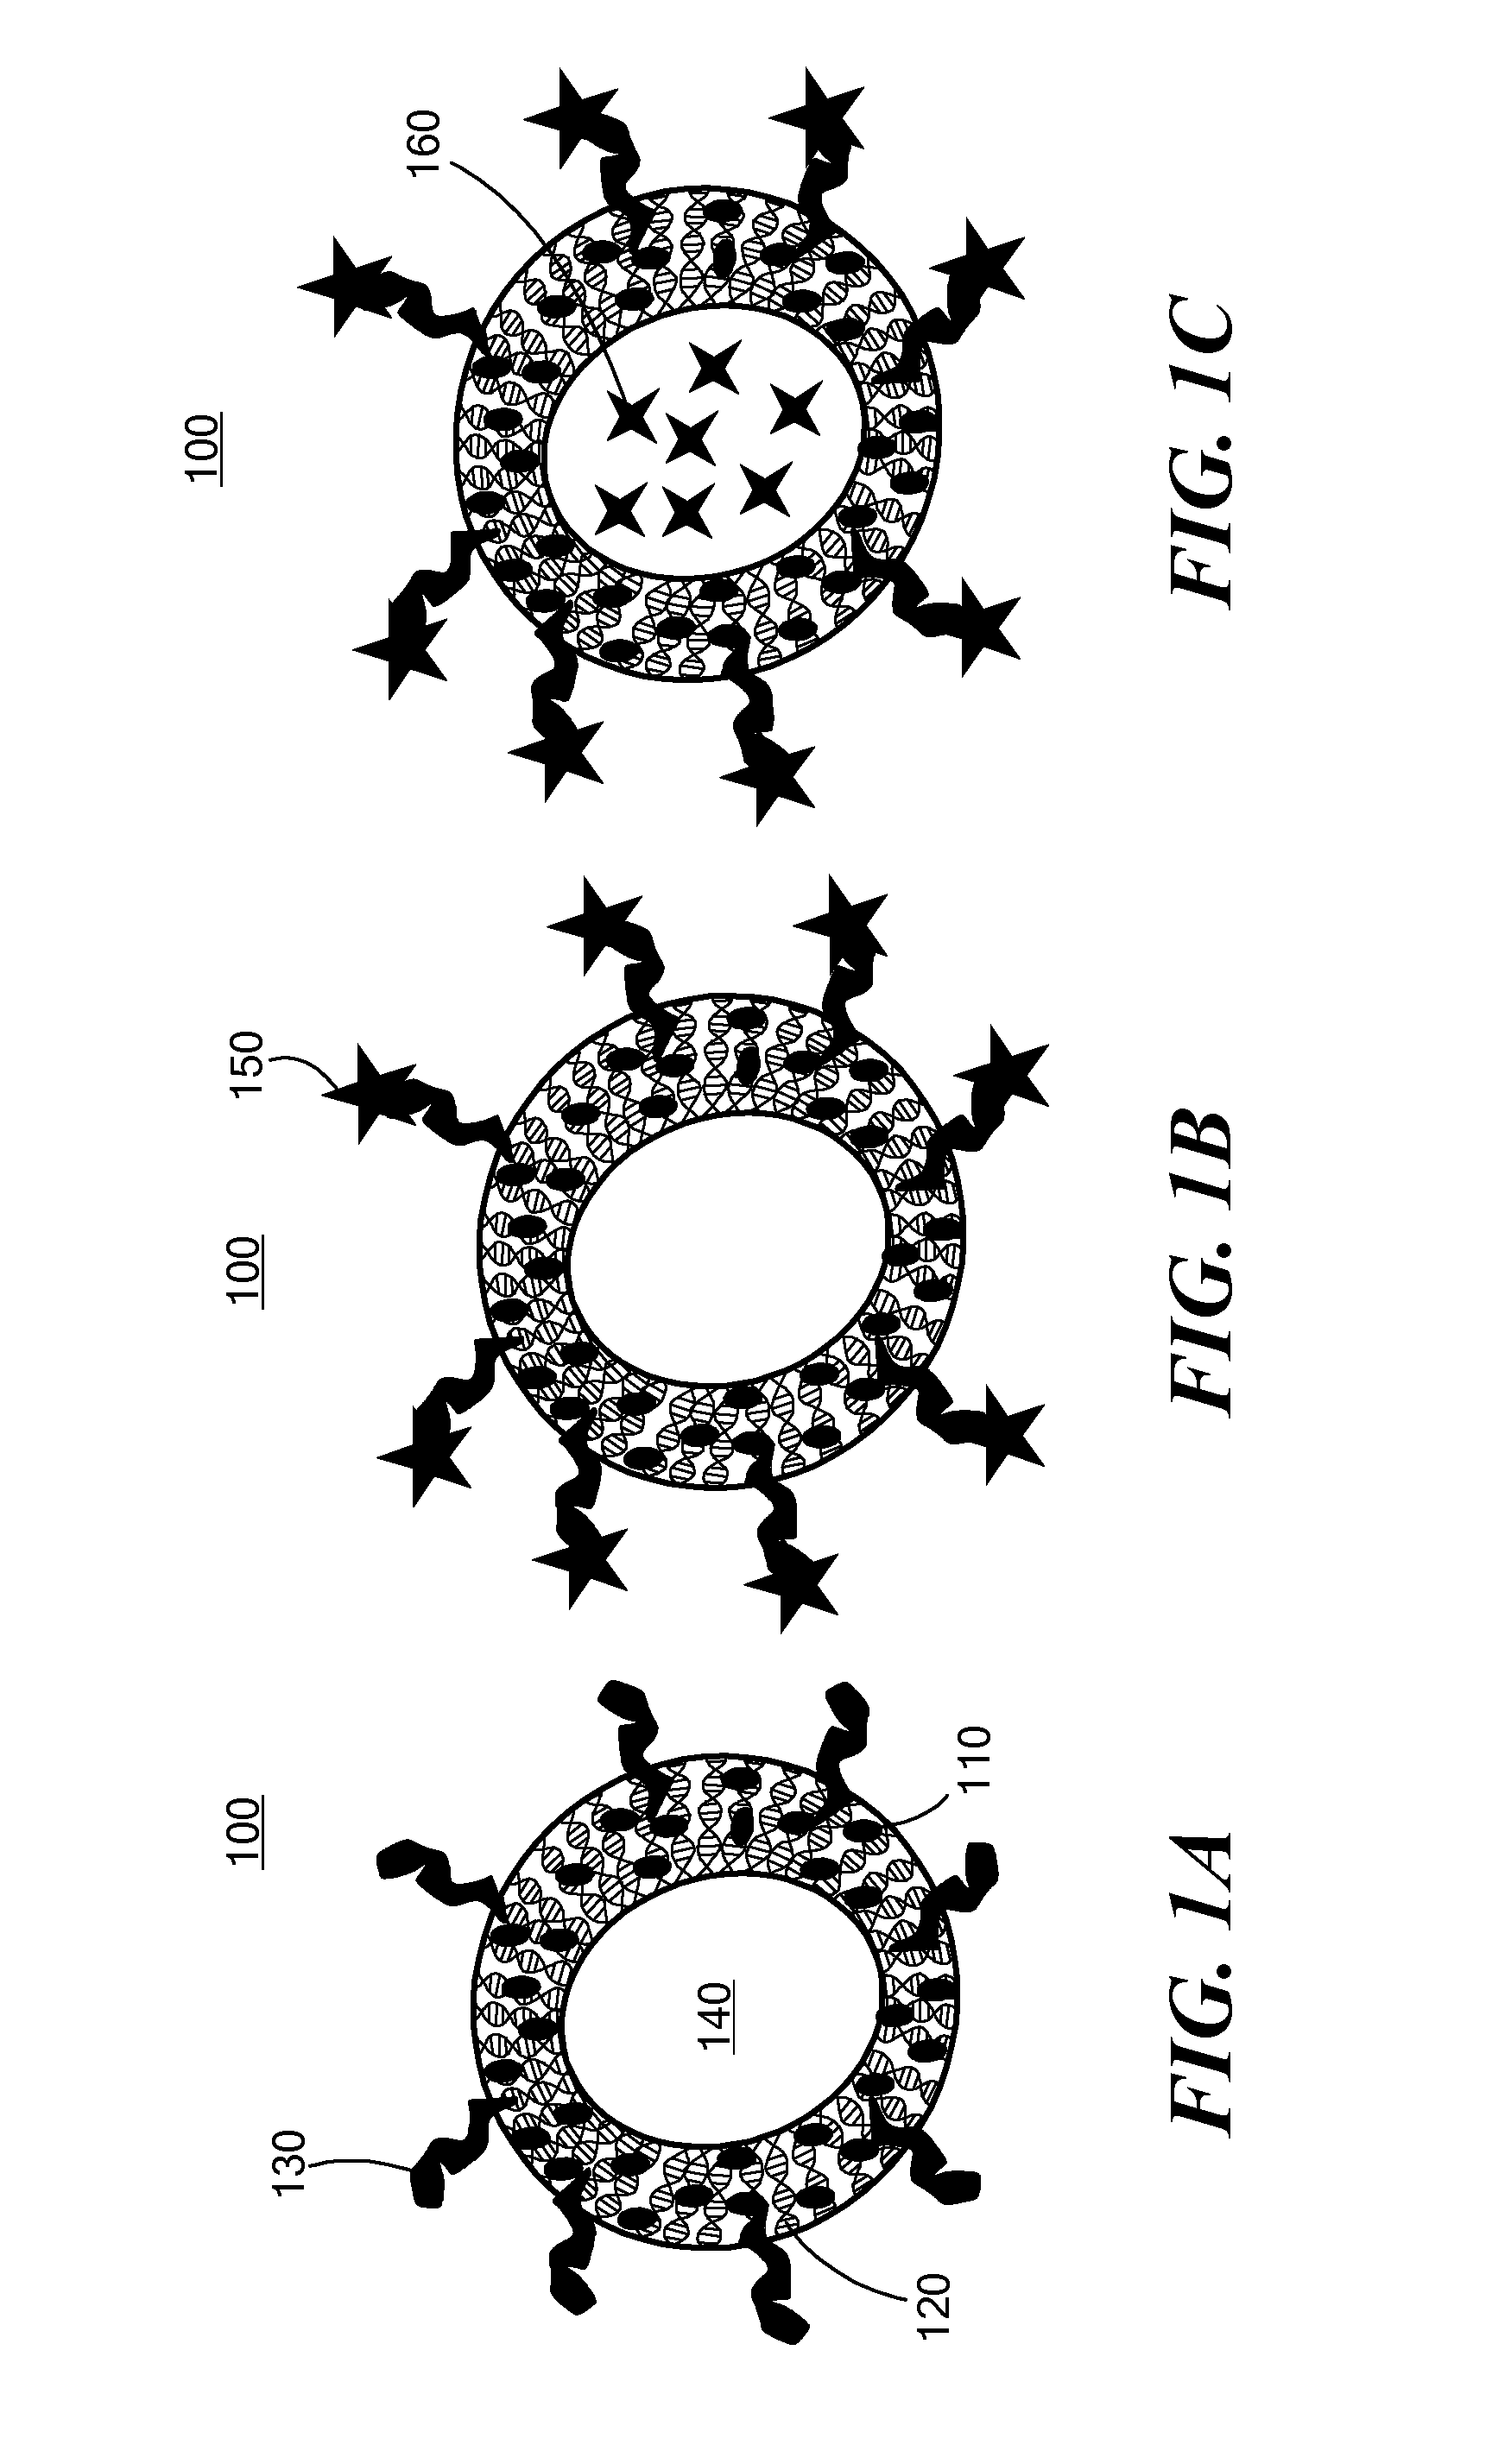 Nanoparticle drug delivery system and method of treating cancer and neurotrauma